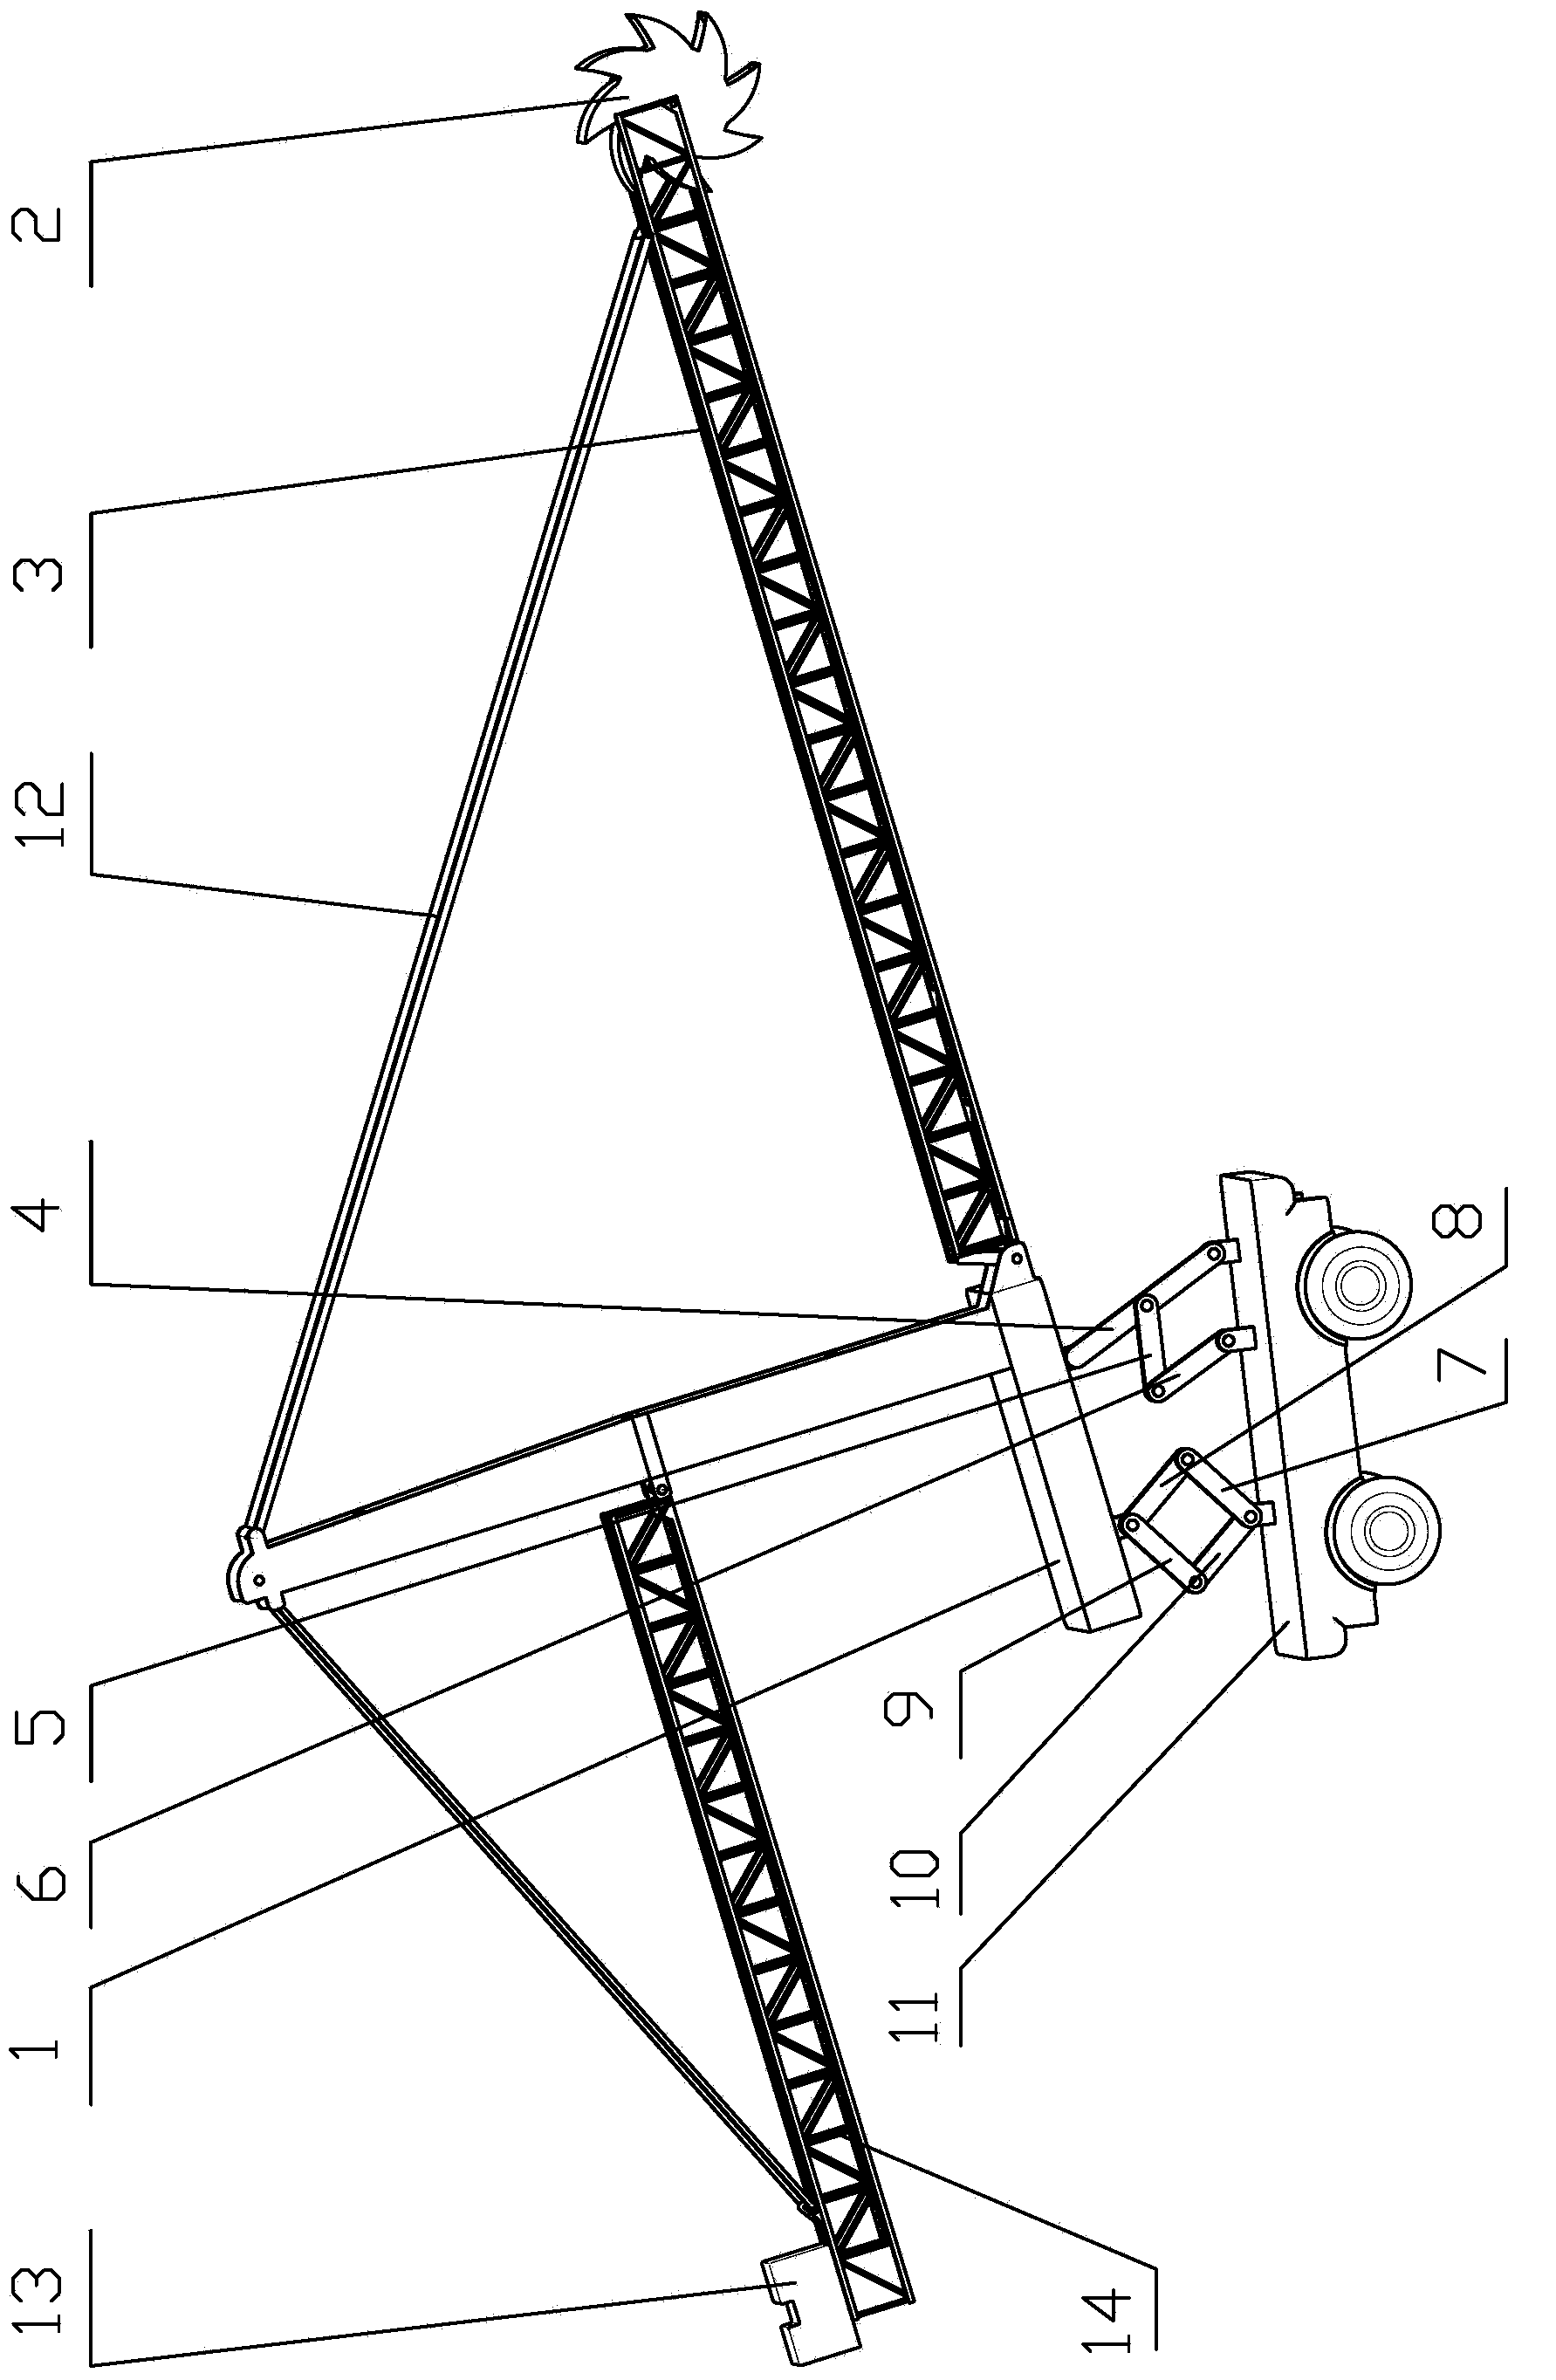 Hybrid-driven type bucket-wheel material stacking and taking machine